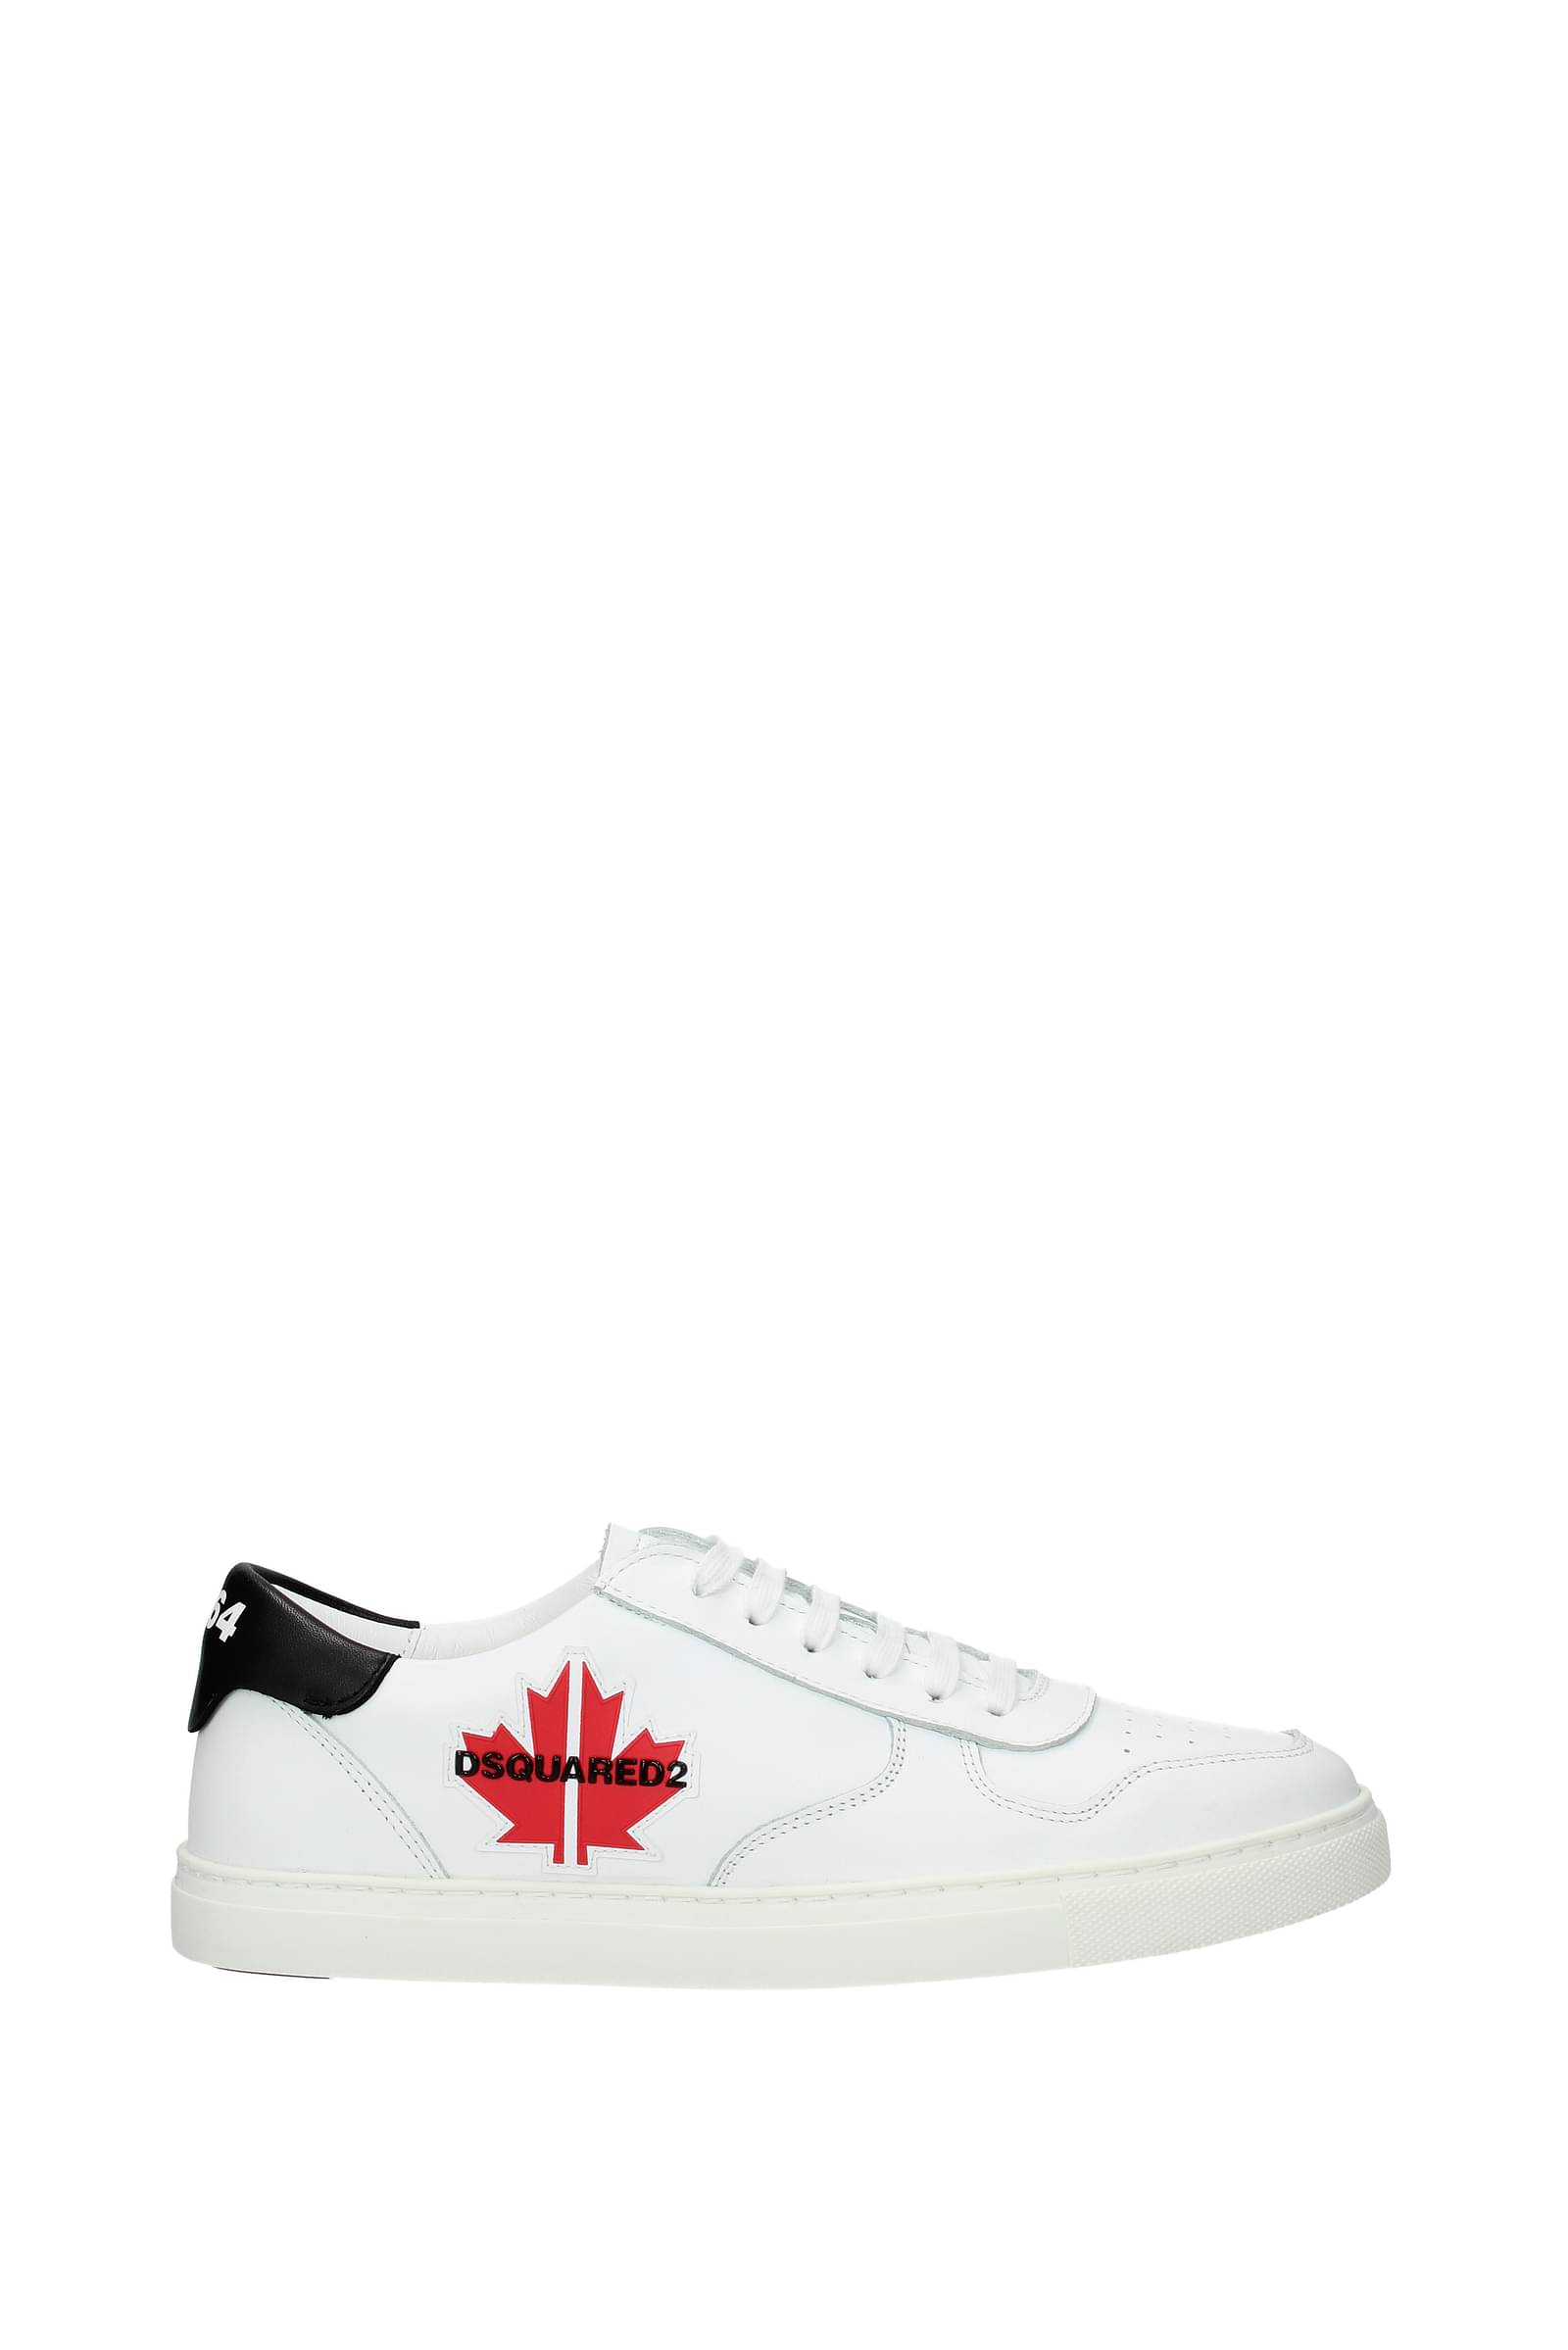 dsquared sneakers outlet